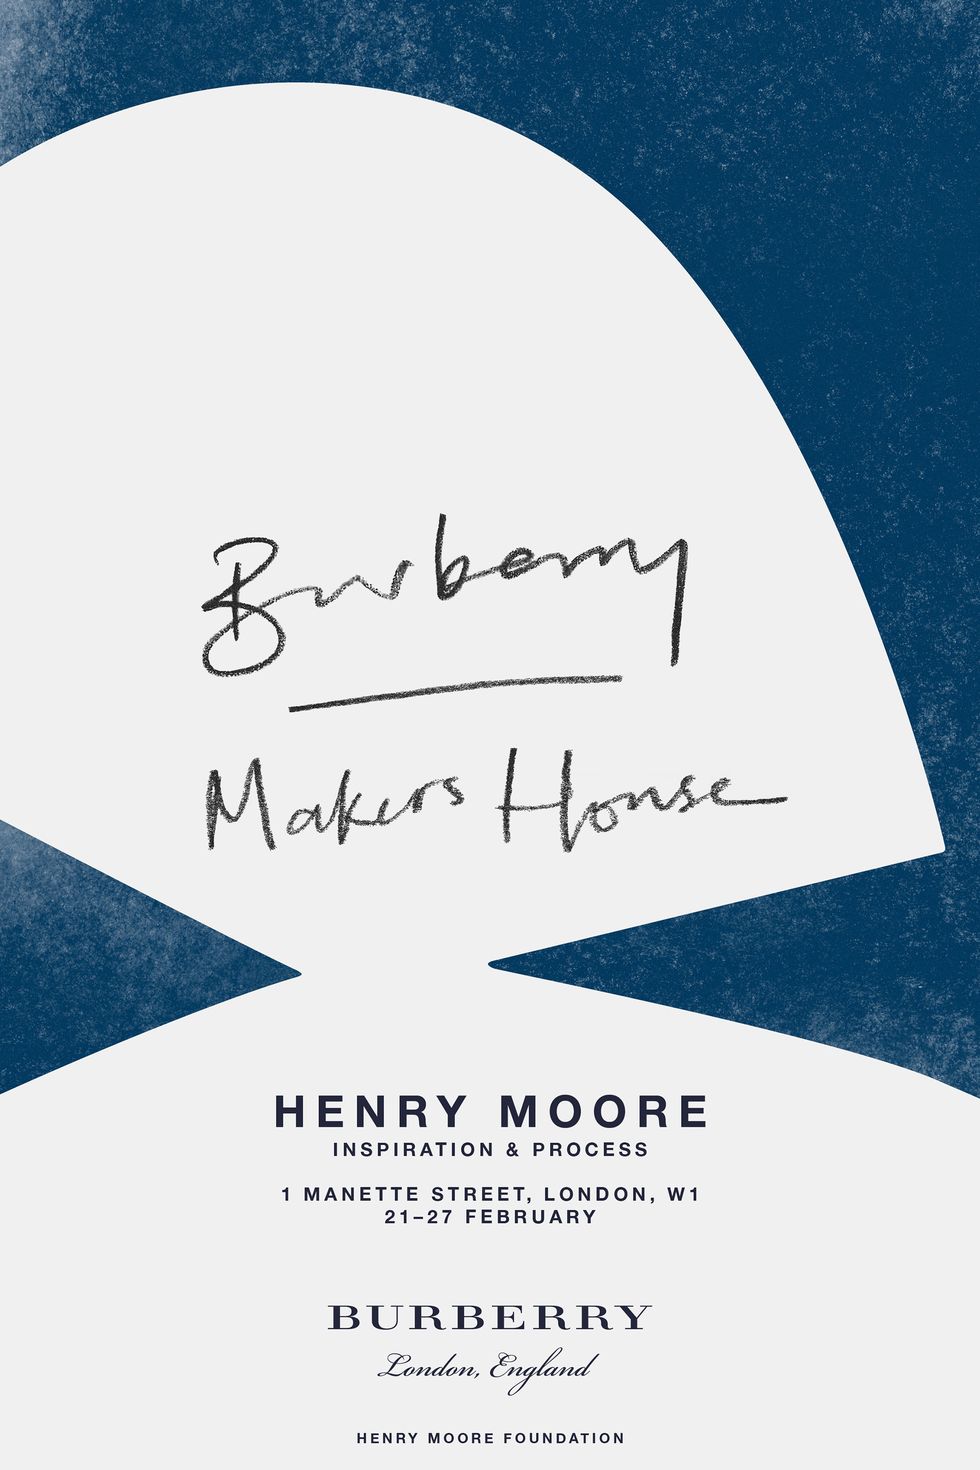 Burberry Makers House February 2017